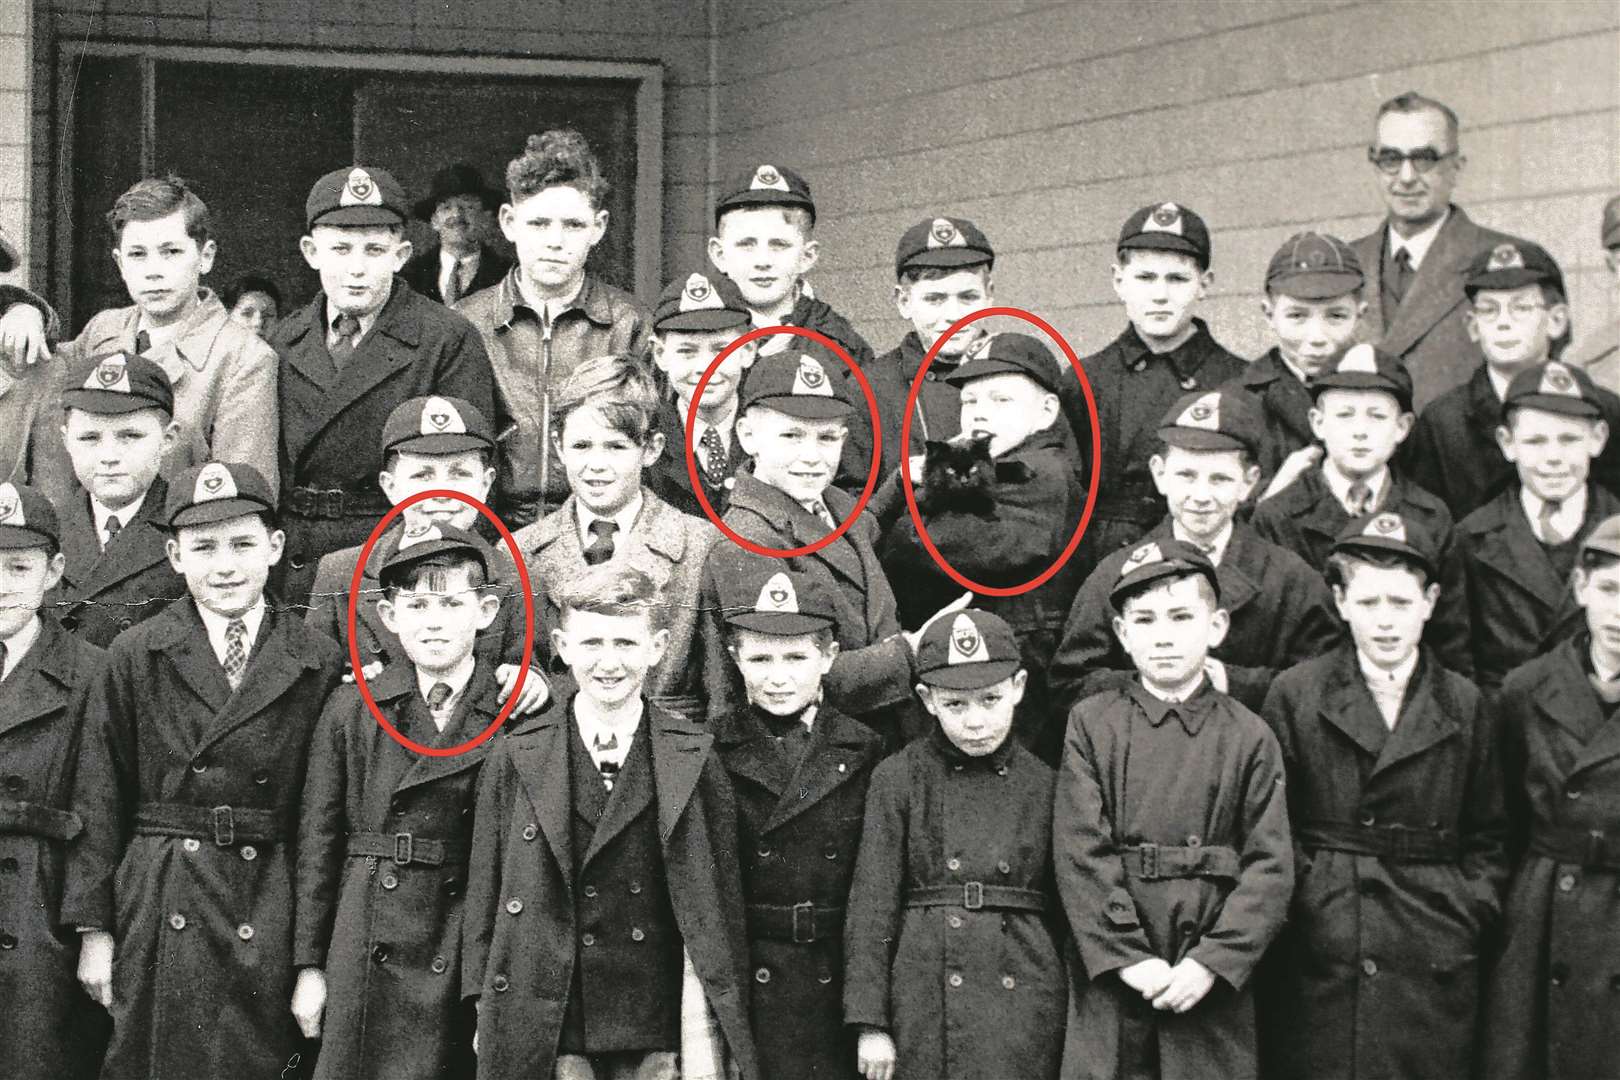 Keith Richards (bottom row 3rd from left), Mick Jagger (right of centre, holding a black cat), Peter Holland (immediatly to the left of Mick Jagger). Picture taken in 1954 at Wentworth School, Dartford.